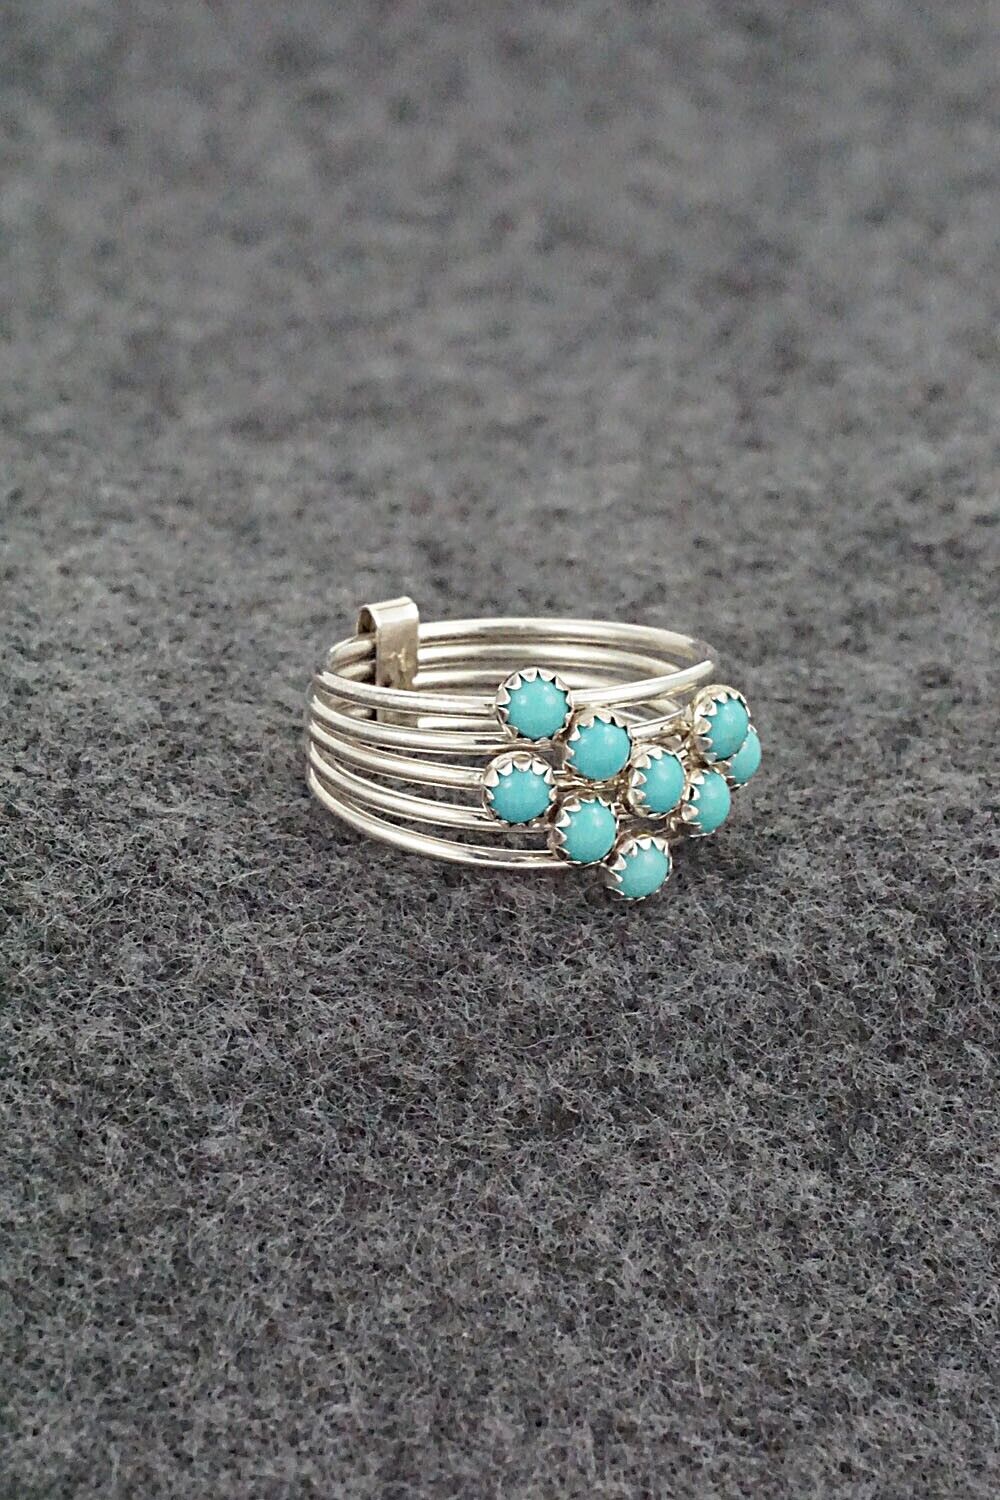 Turquoise & Sterling Silver Ring - Dorothy Yazzie - Size 4.5